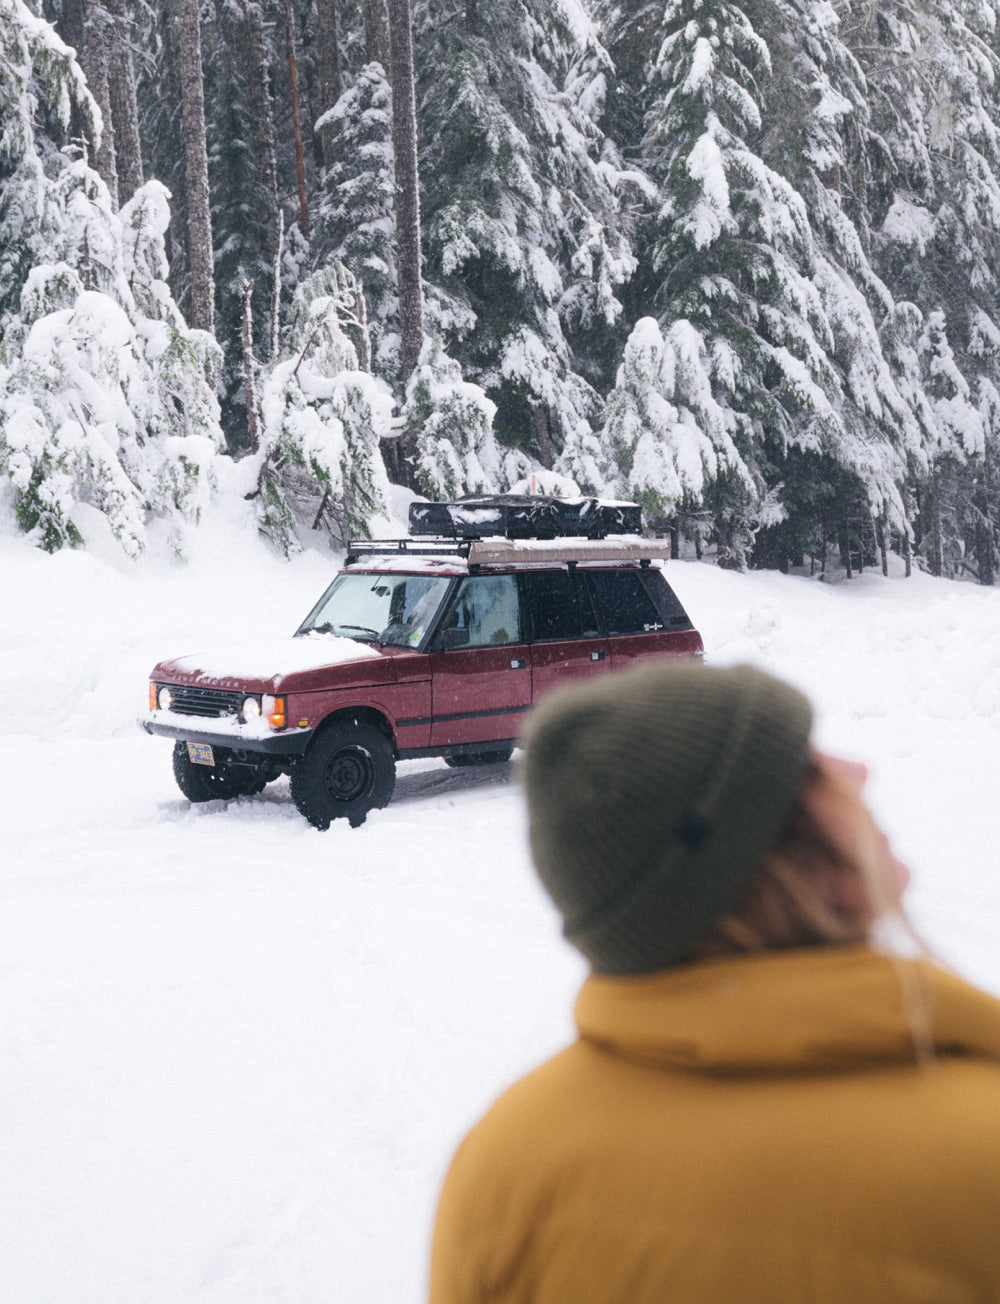 A 4x4 drives through a snow covered road in a forest.